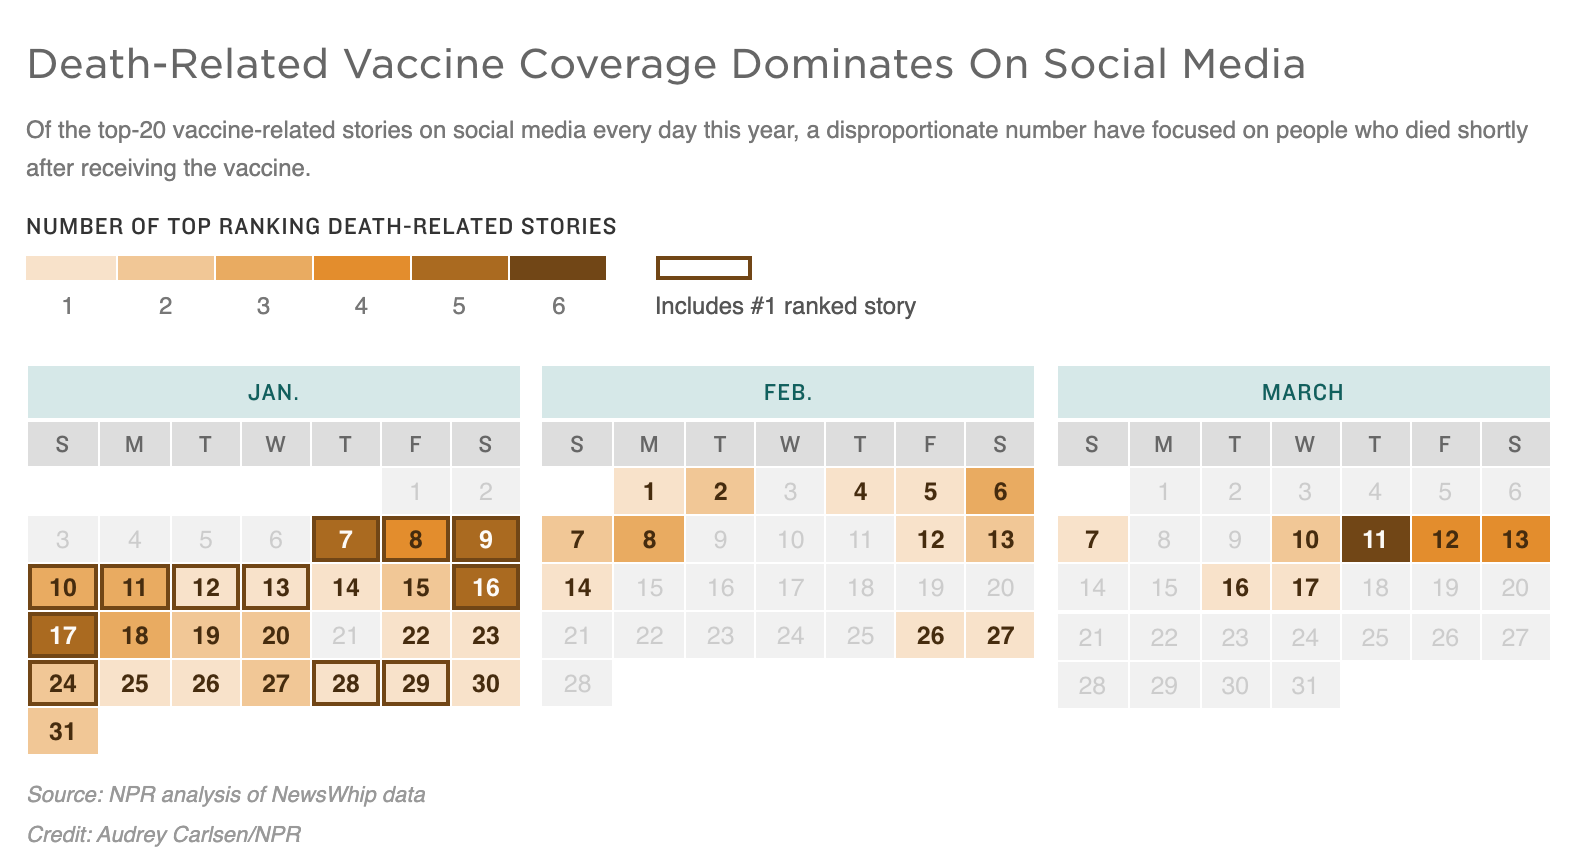 A graphic illustrates that death-related vaccine coverage dominates on social media